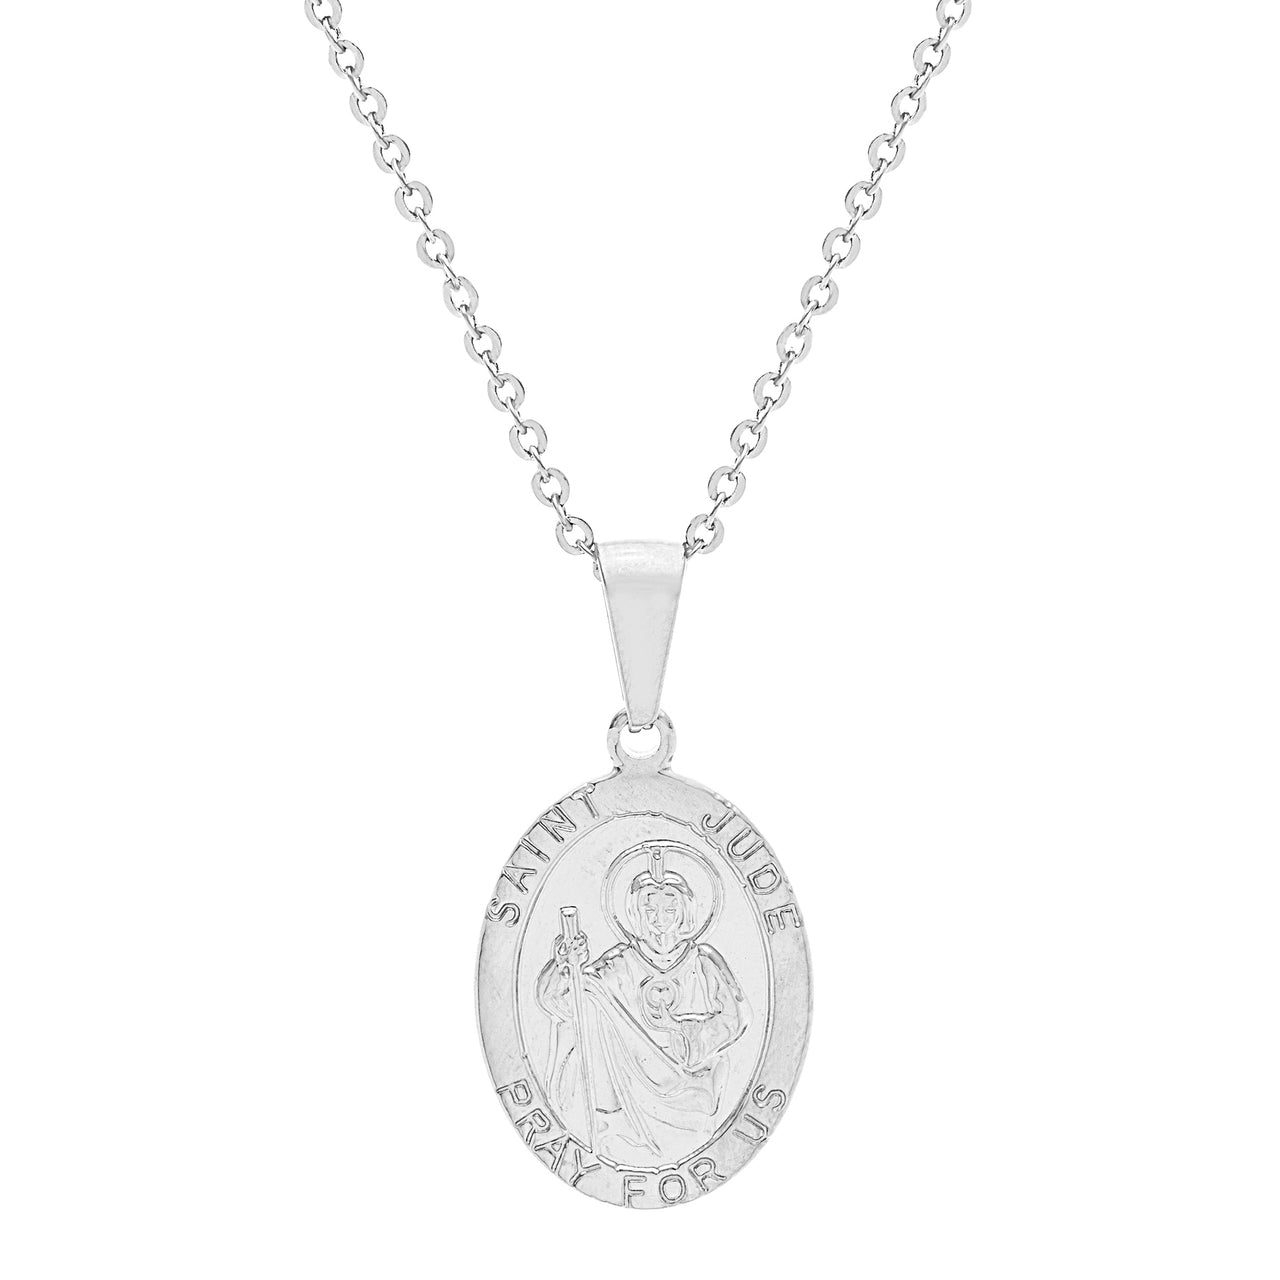 My Bible Stainless Steel Religious Medal Pendant Necklace